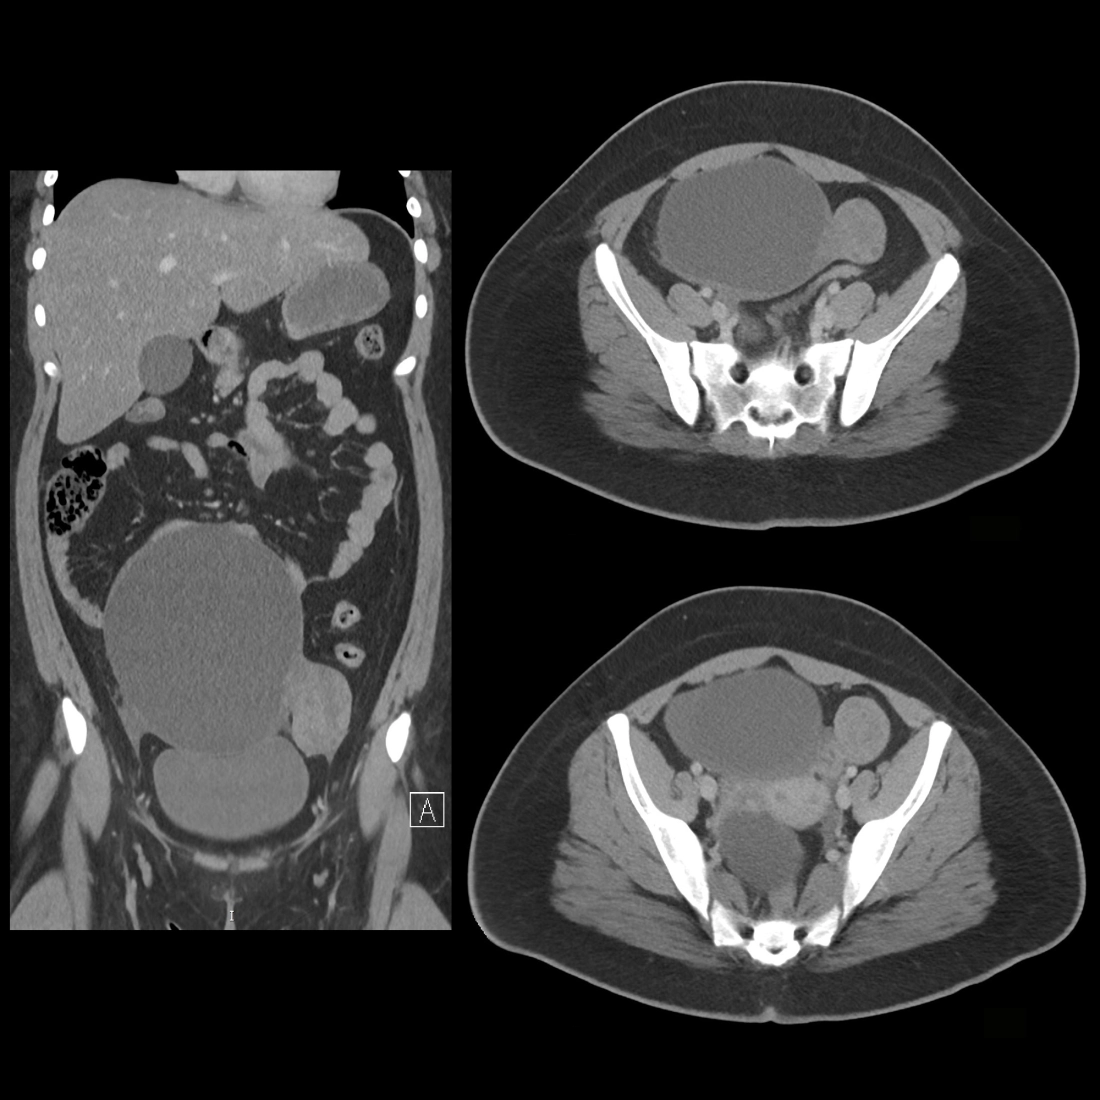 Ruptured ovarian cyst, Radiology Reference Article